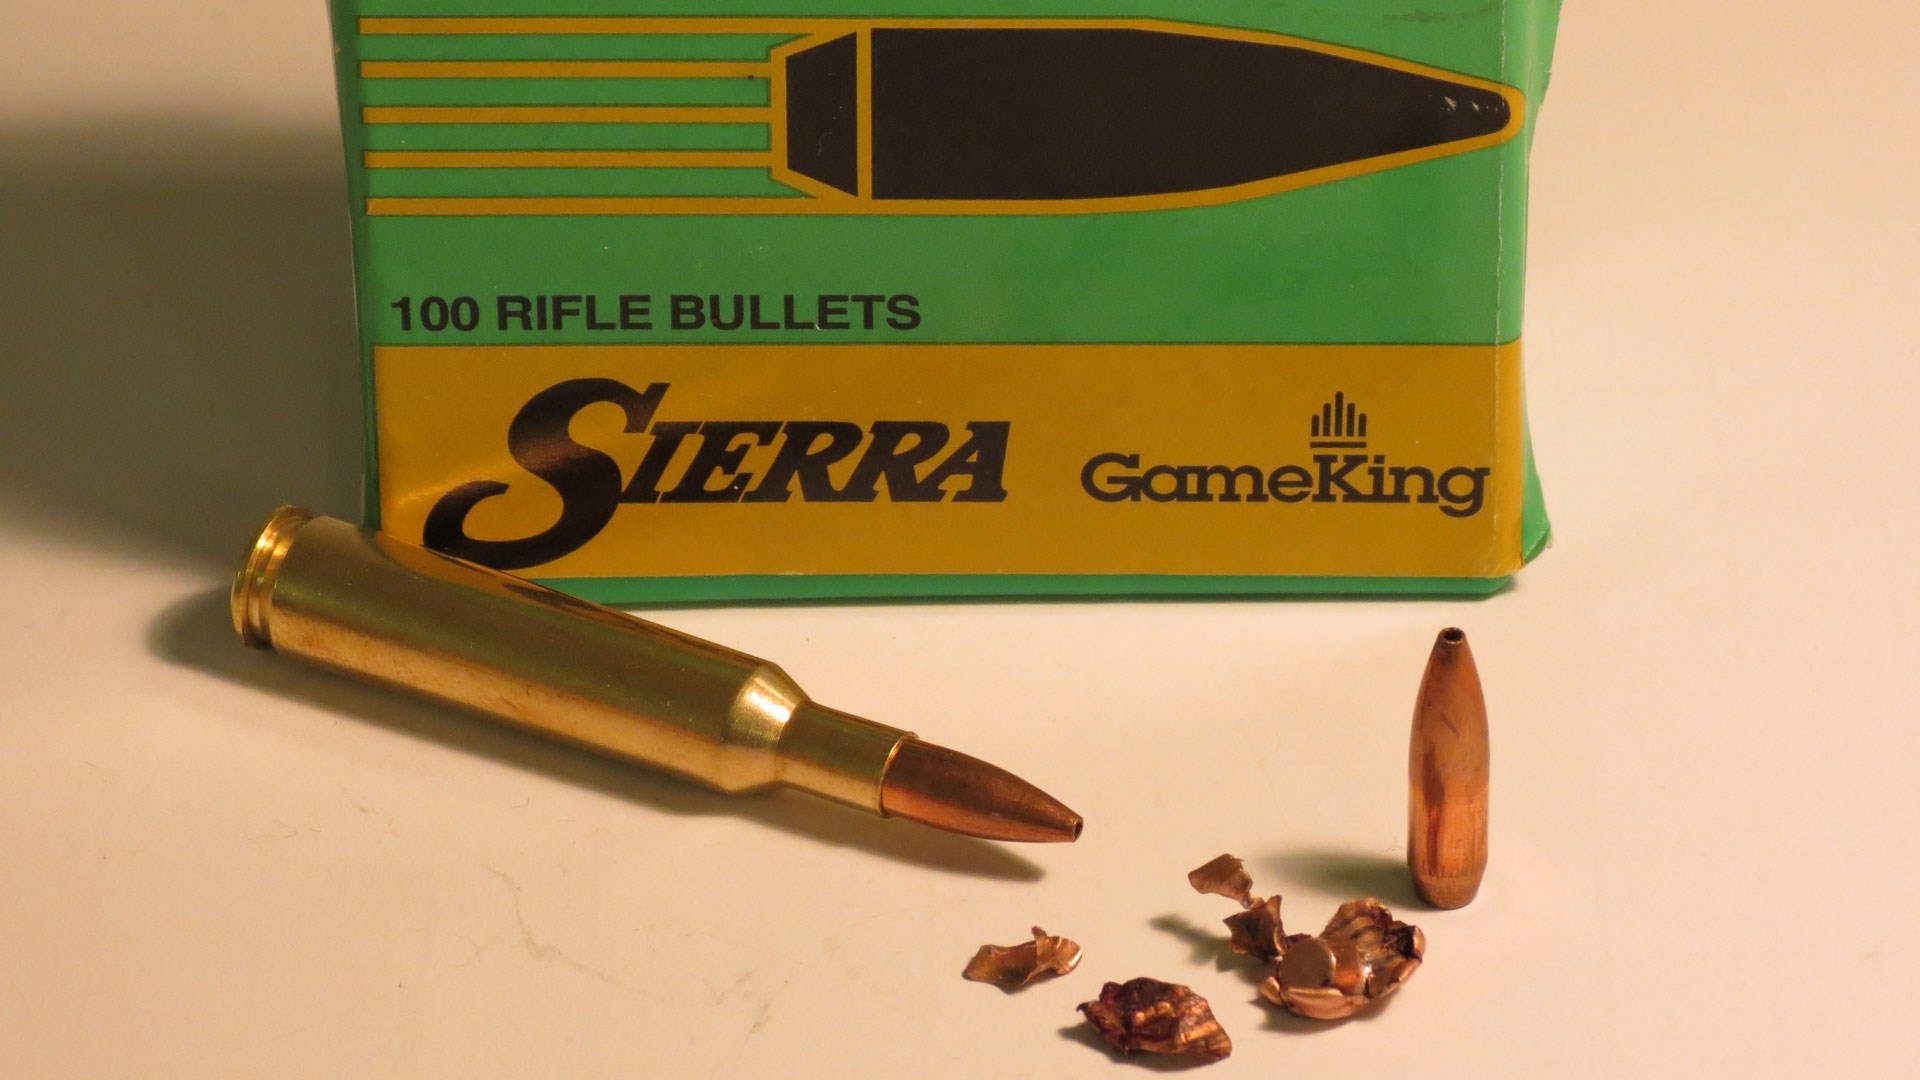 Box of Sierra GameKing, with cartridge, bullet and fragmentation pictured alongside